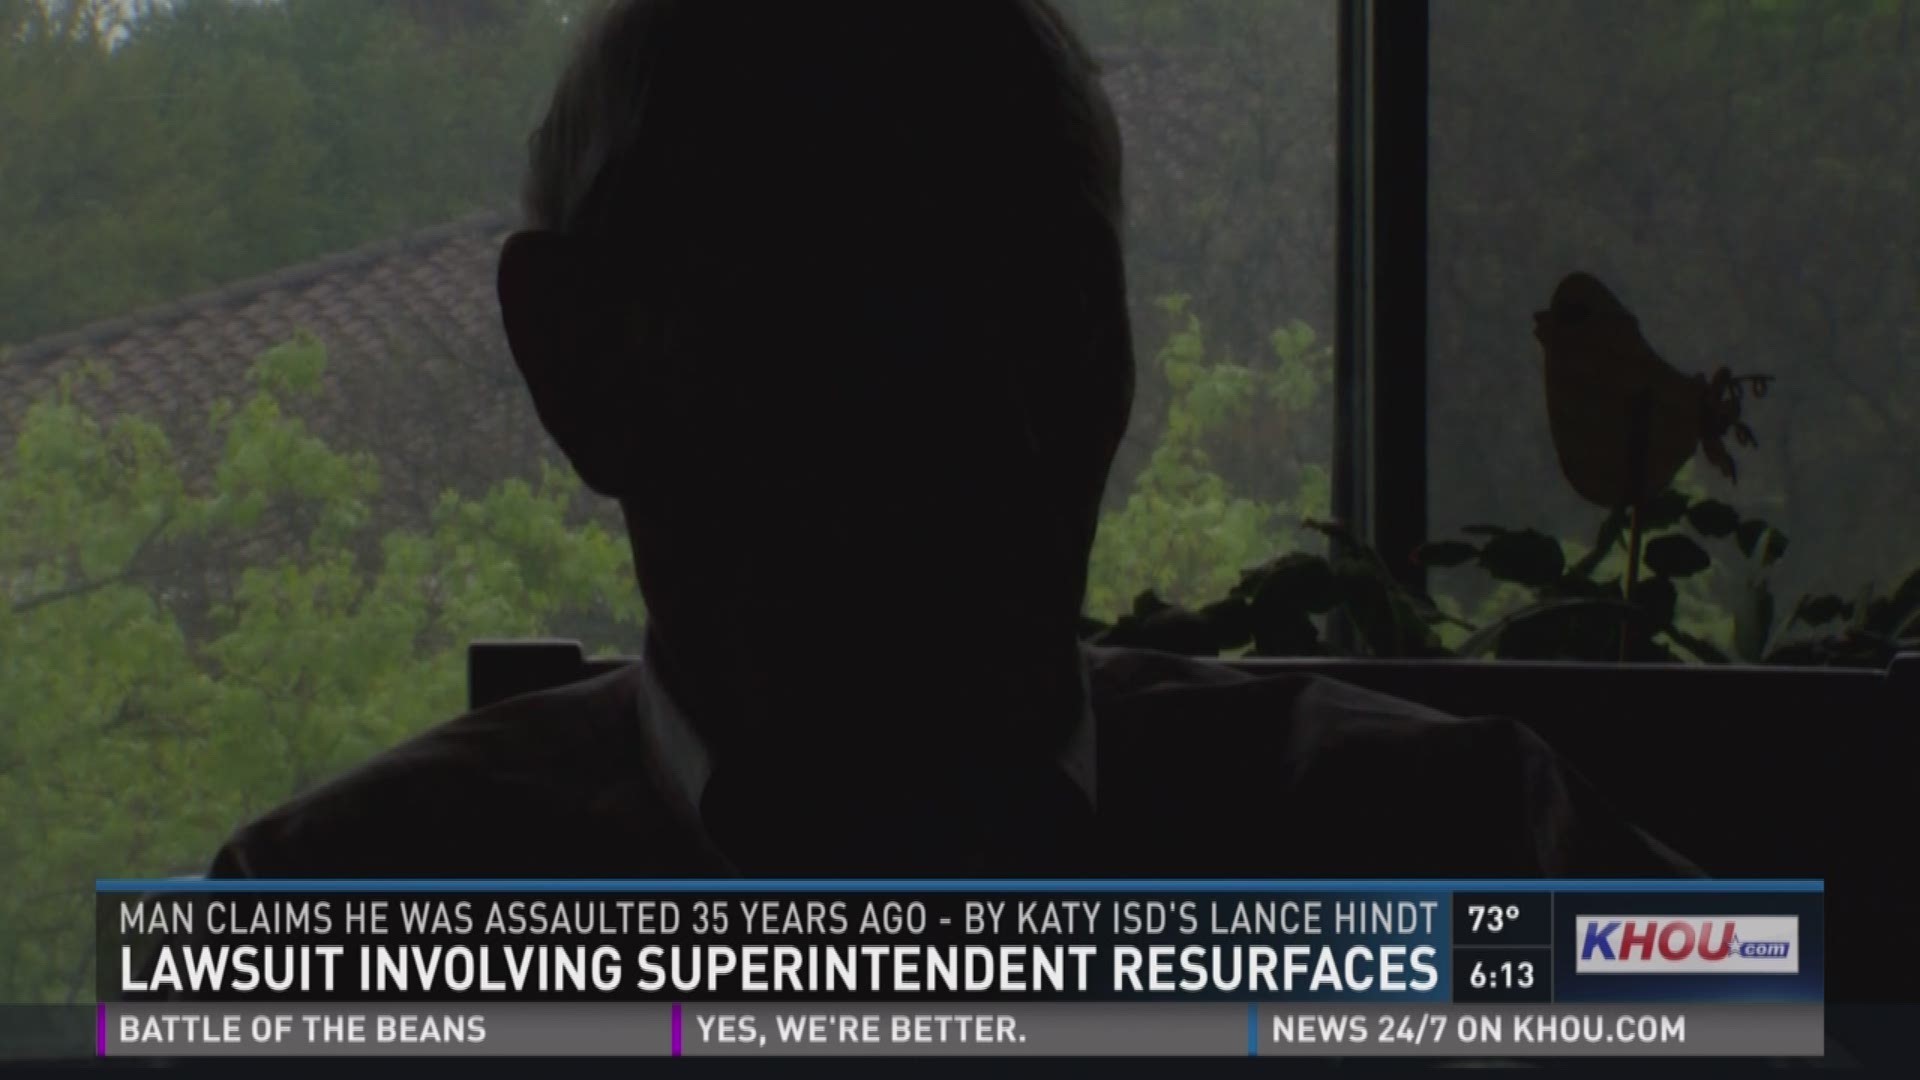 A man has come forward, claiming he was assaulted 35 years ago by Katy ISD superintendent Lance Hindt.